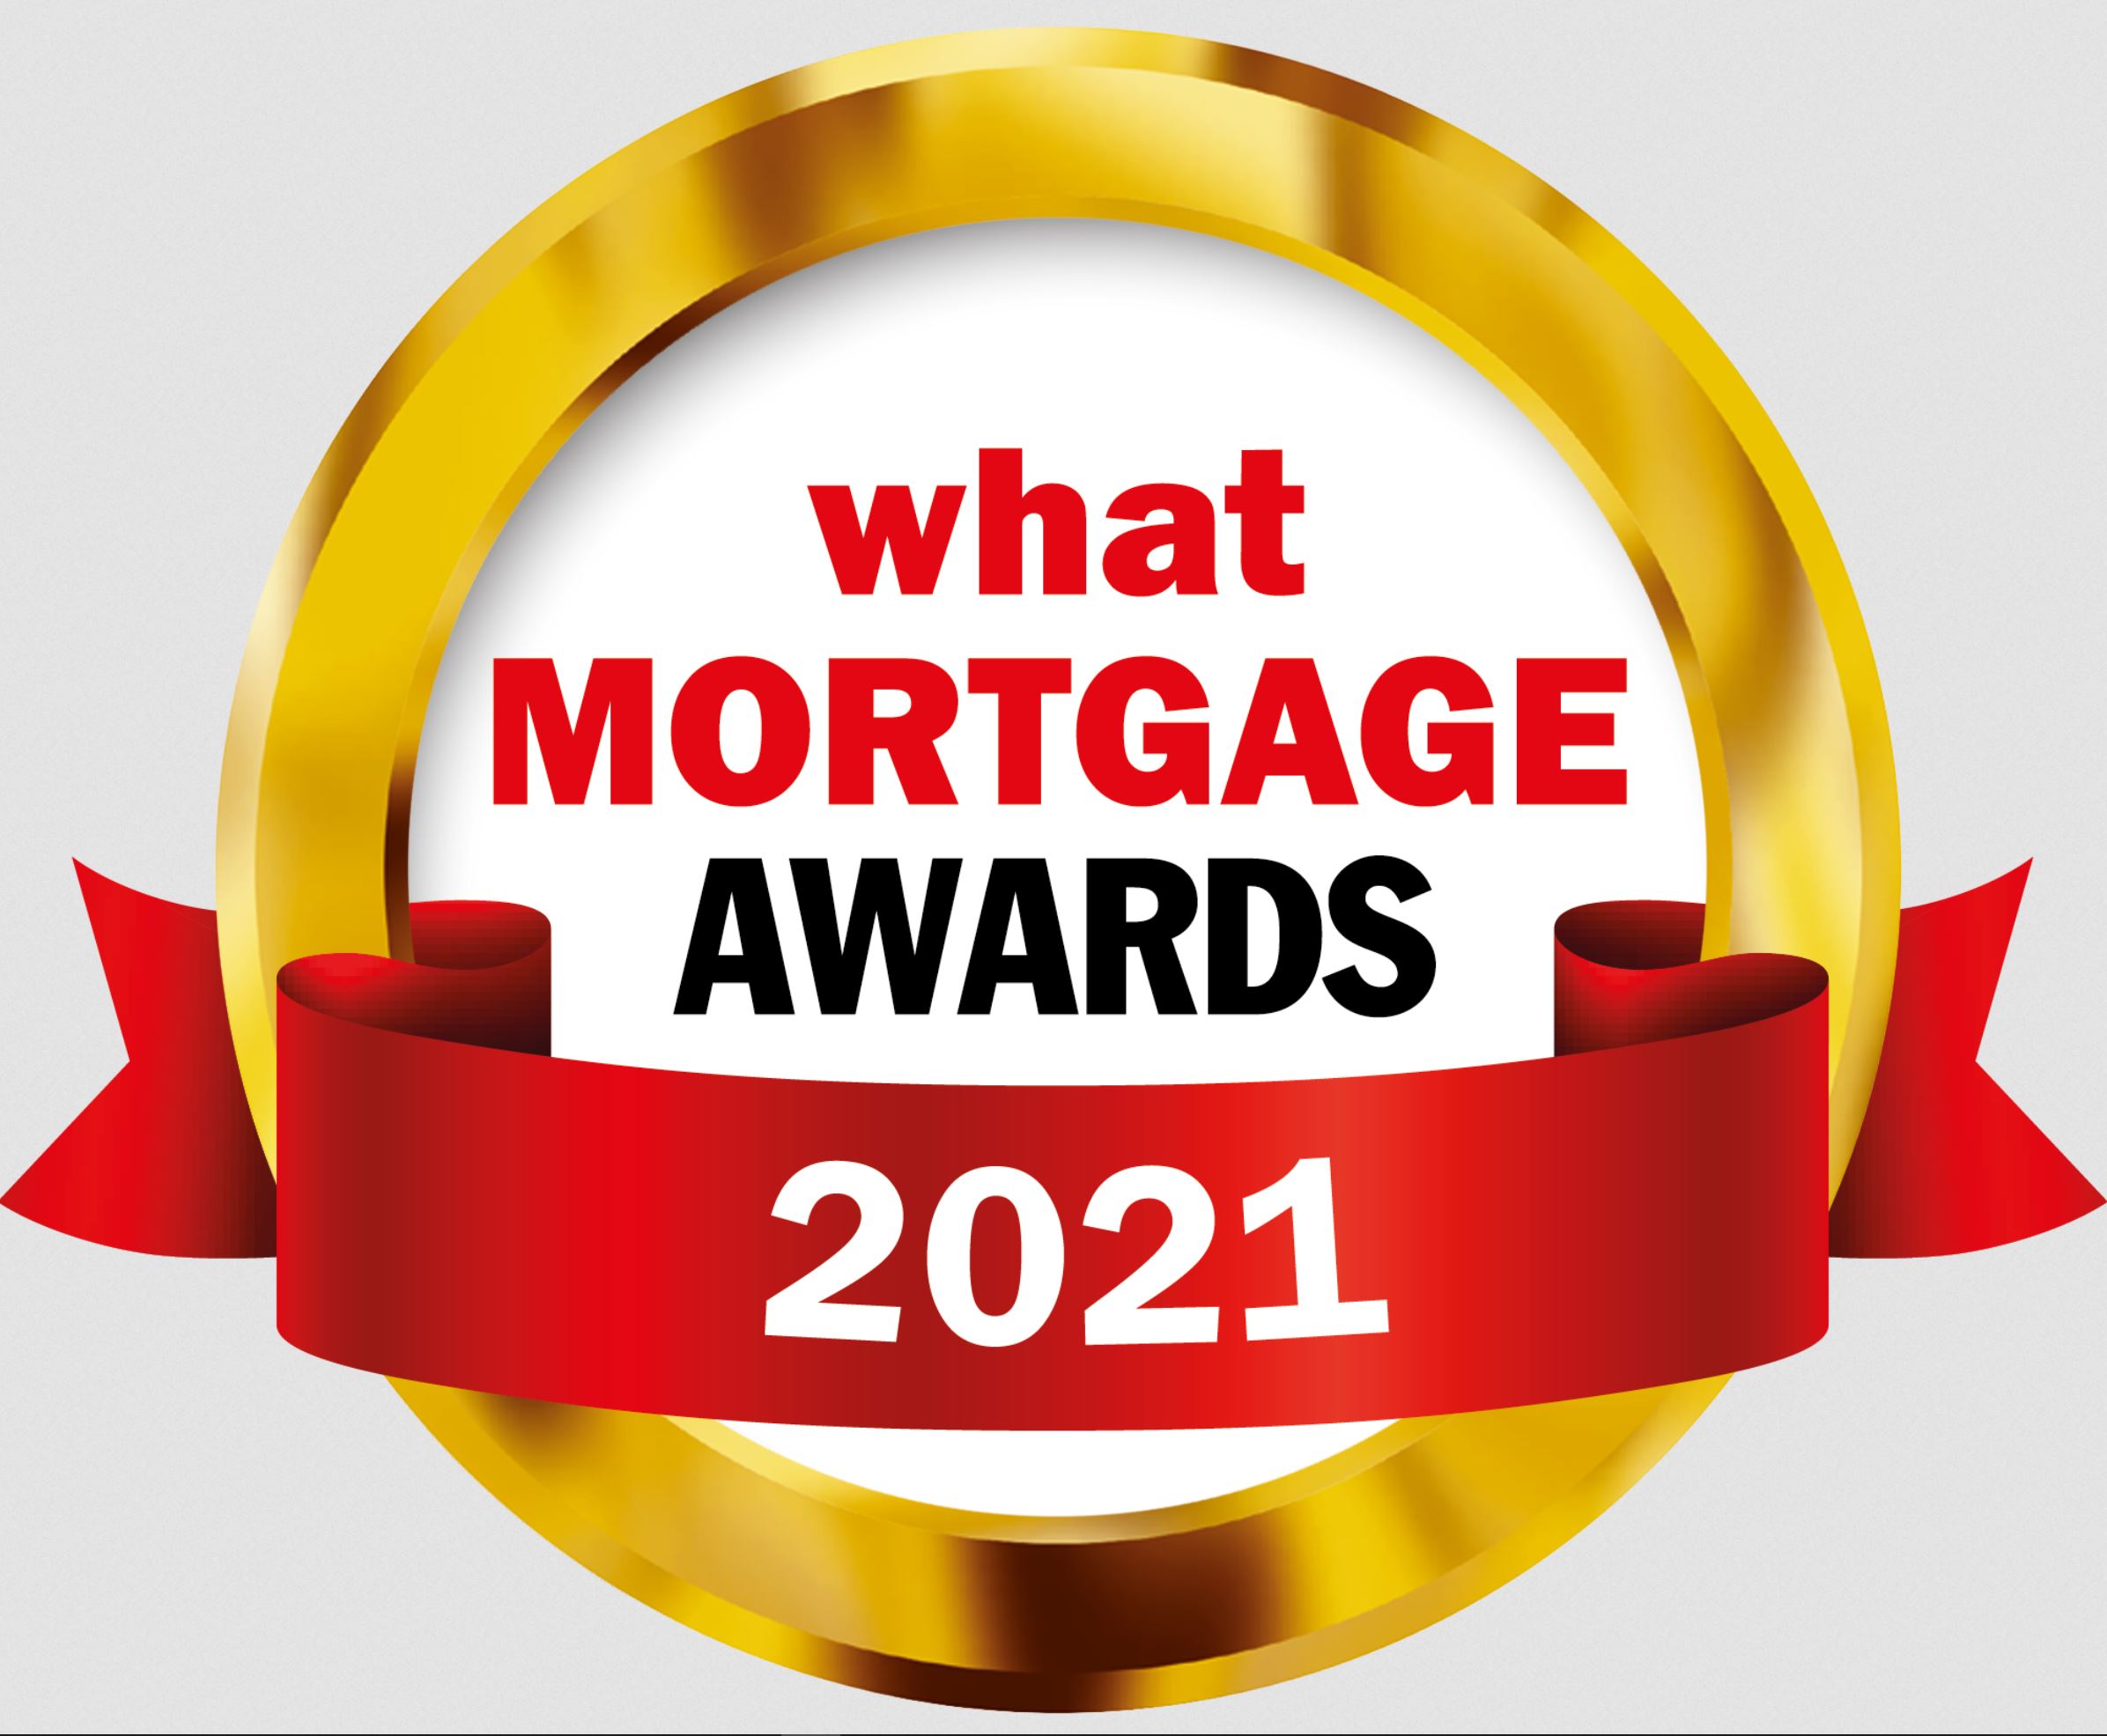 25 years best option applying for a mortgage age of 60